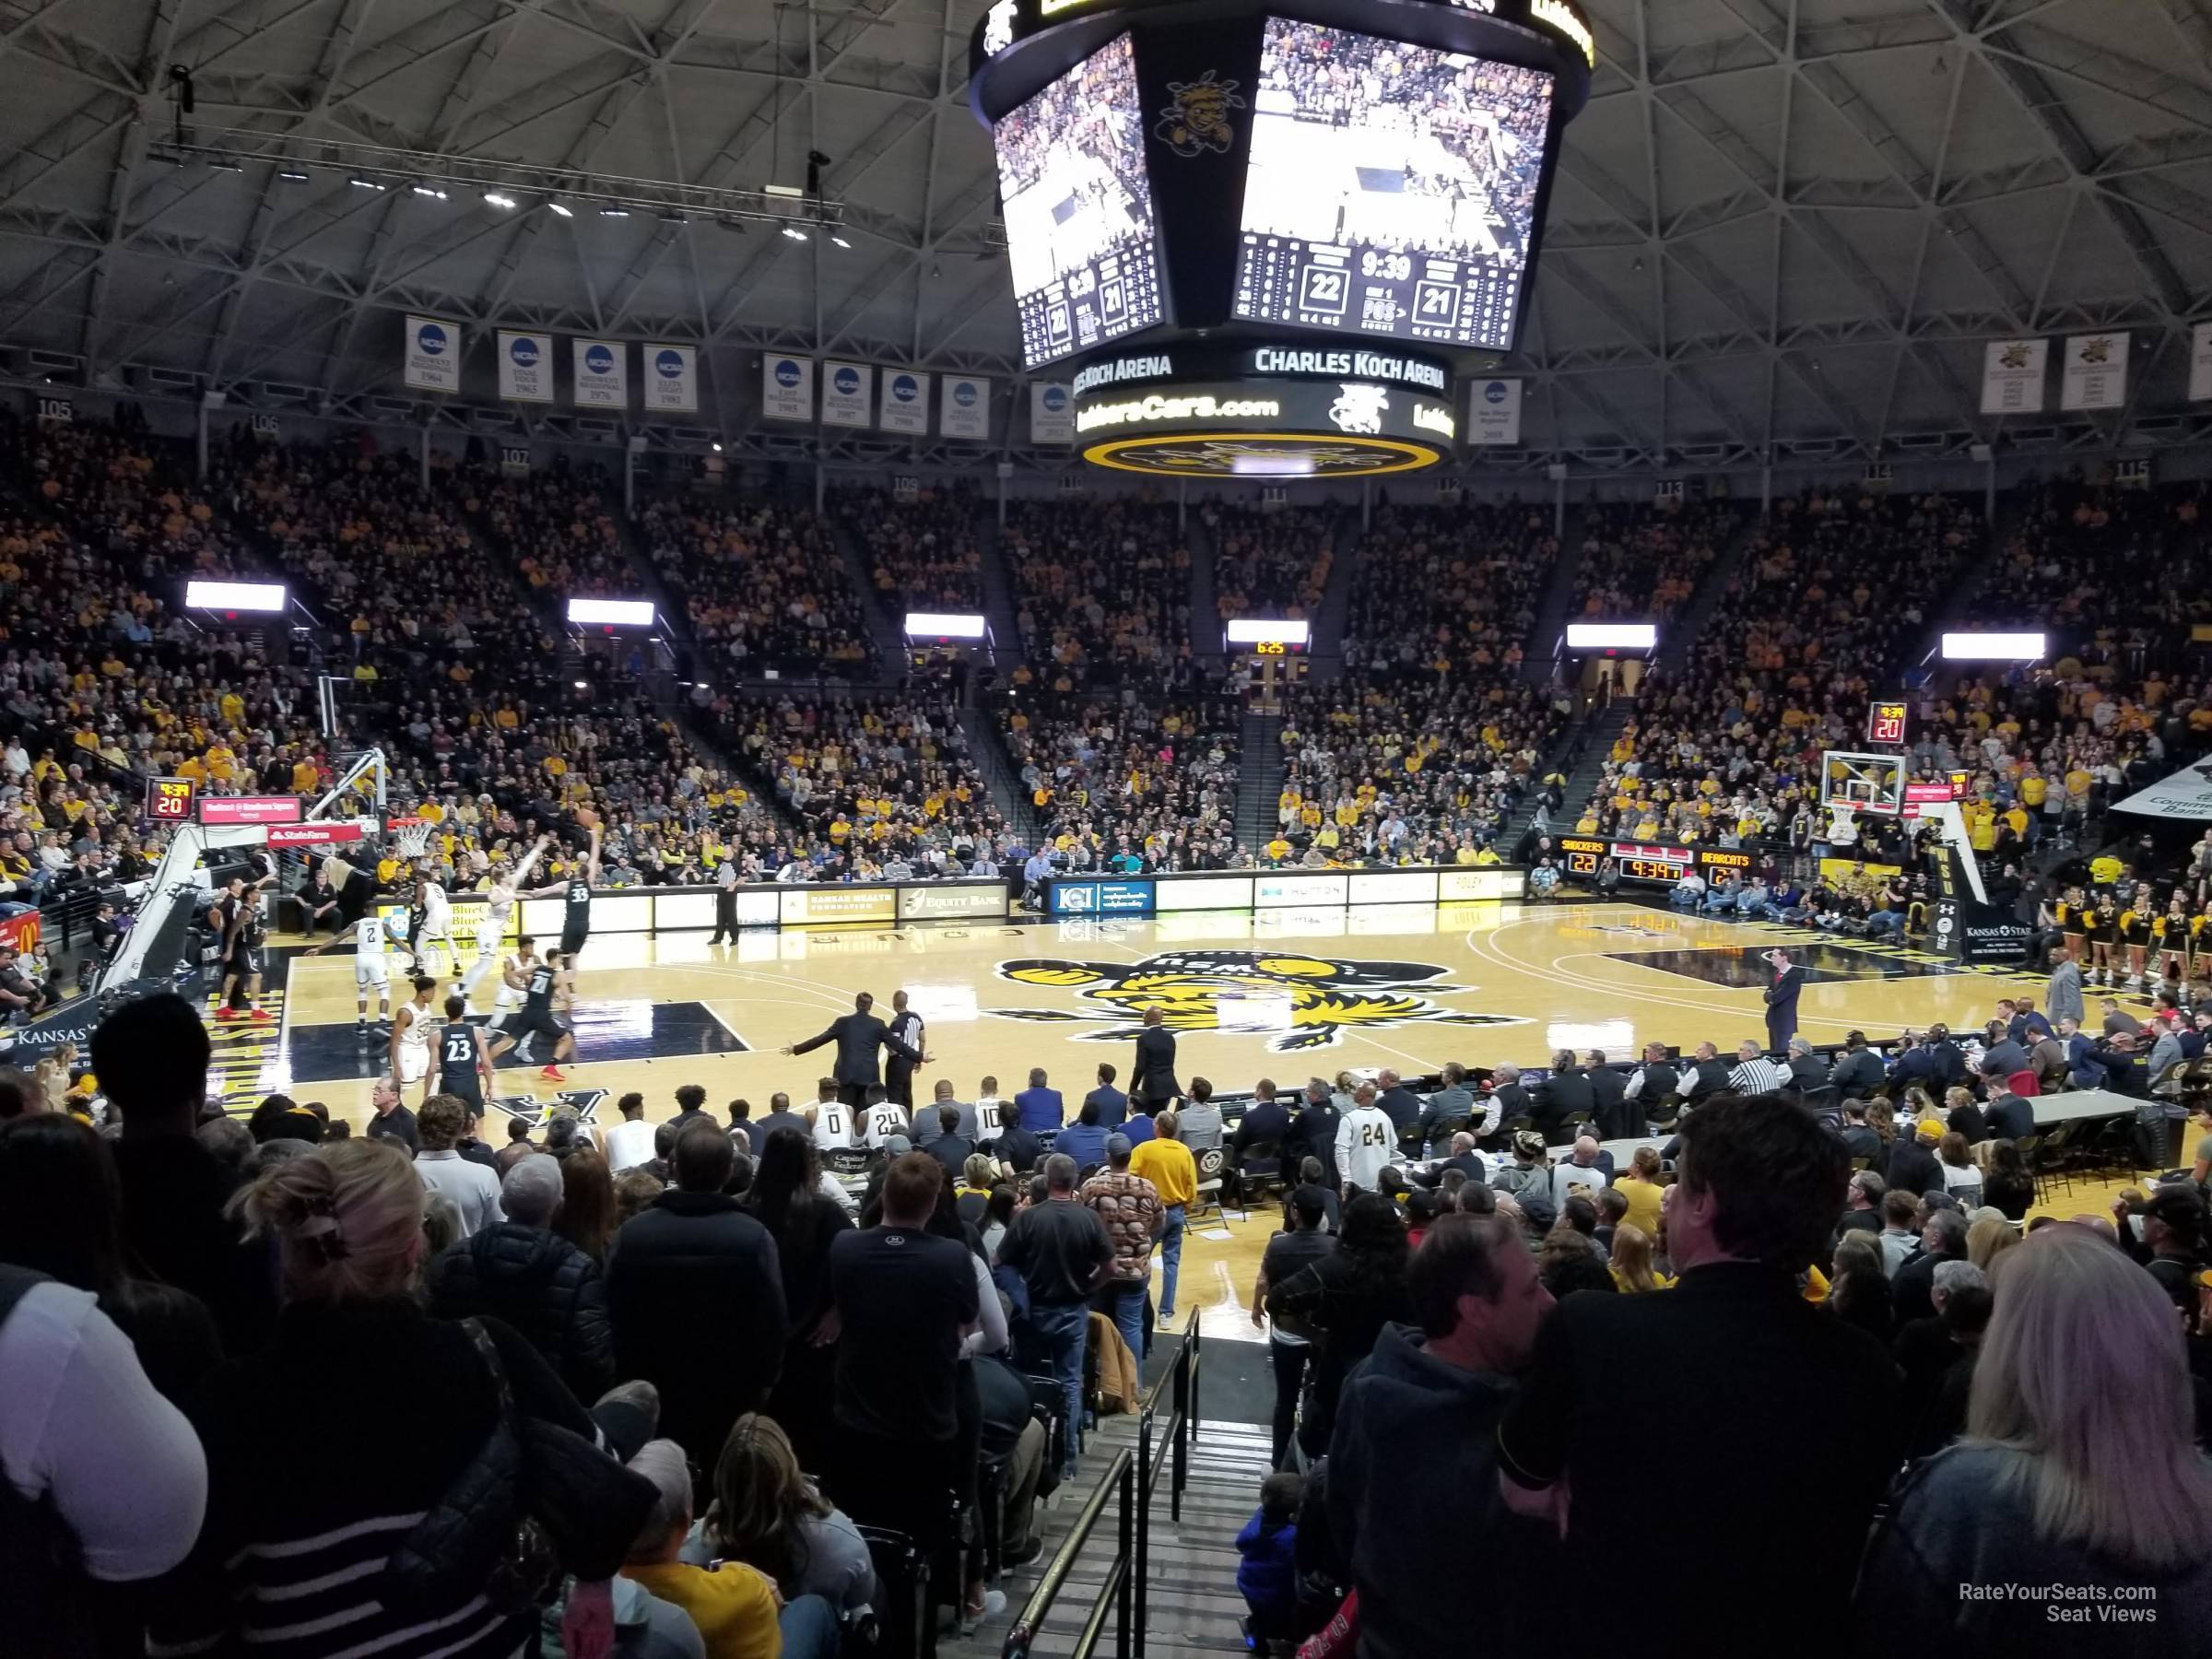 section 122, row 14 seat view  - charles koch arena